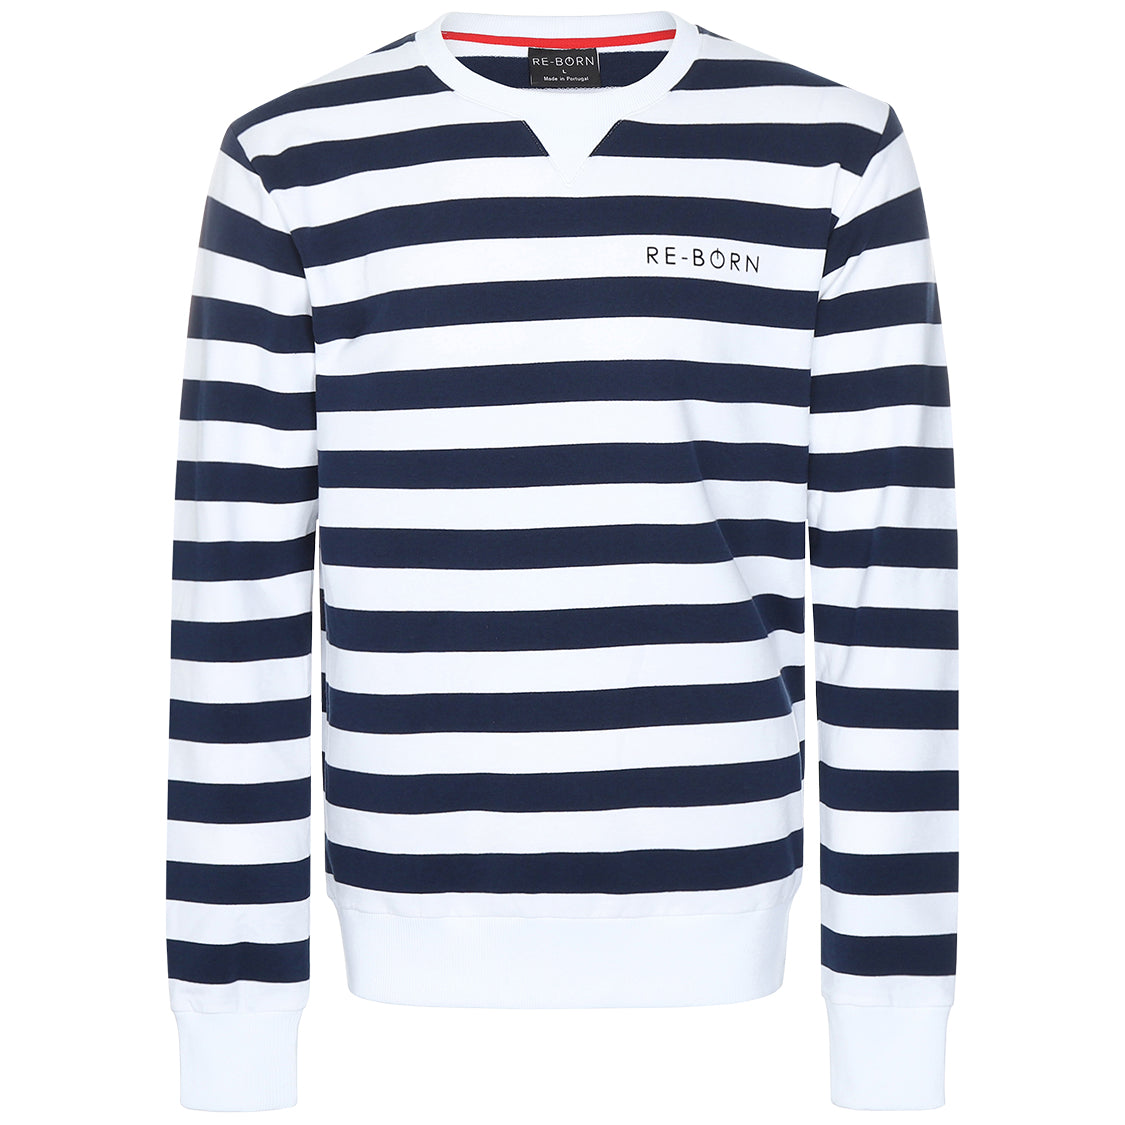 Striped Long Sleeve Shirt Black and White Adult (Small) 